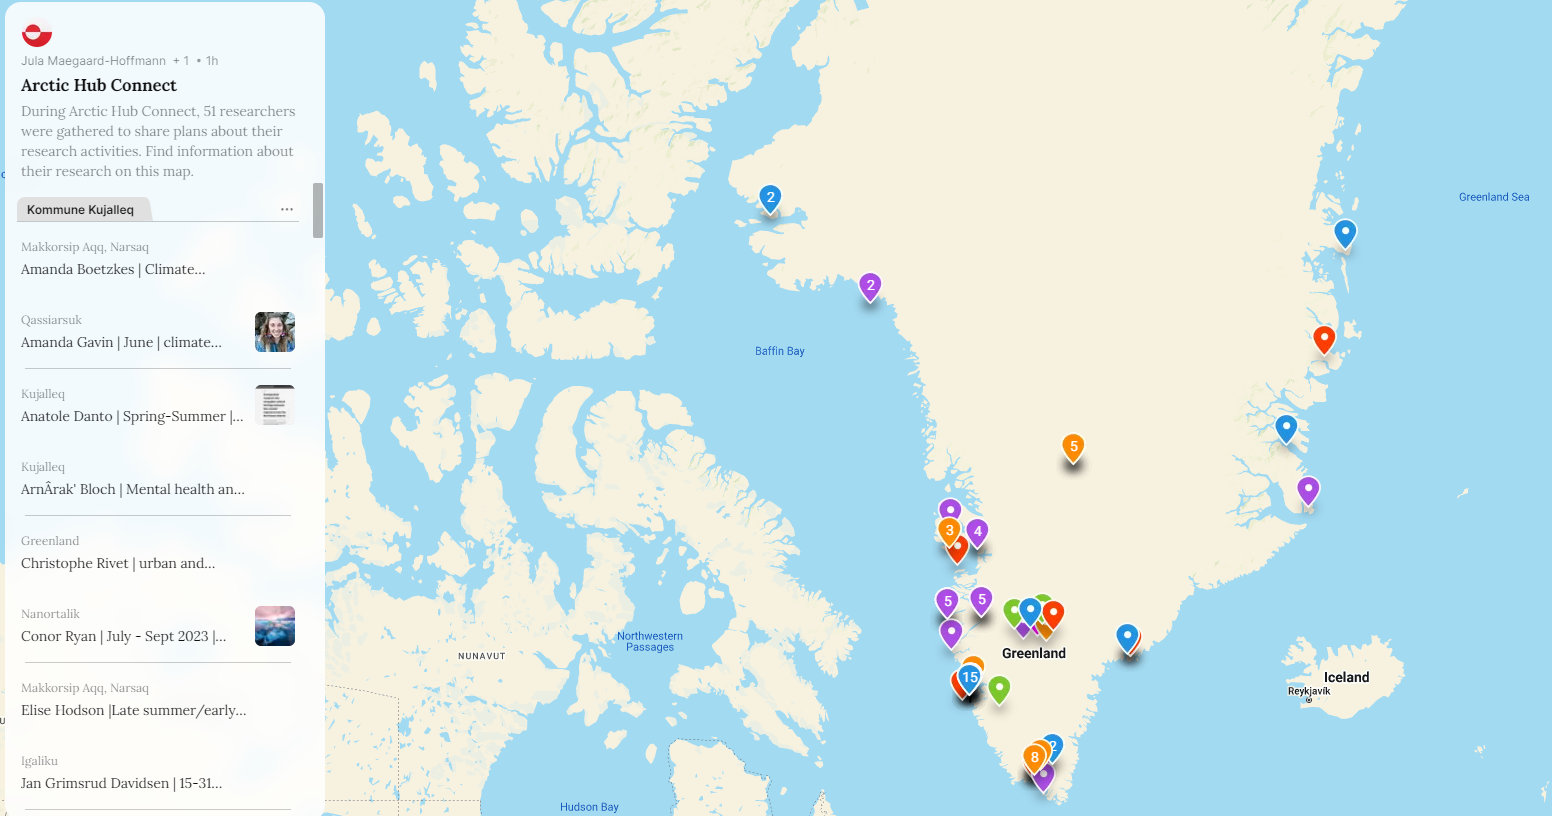 Photo 1 - Map of Arctic Hub Connect